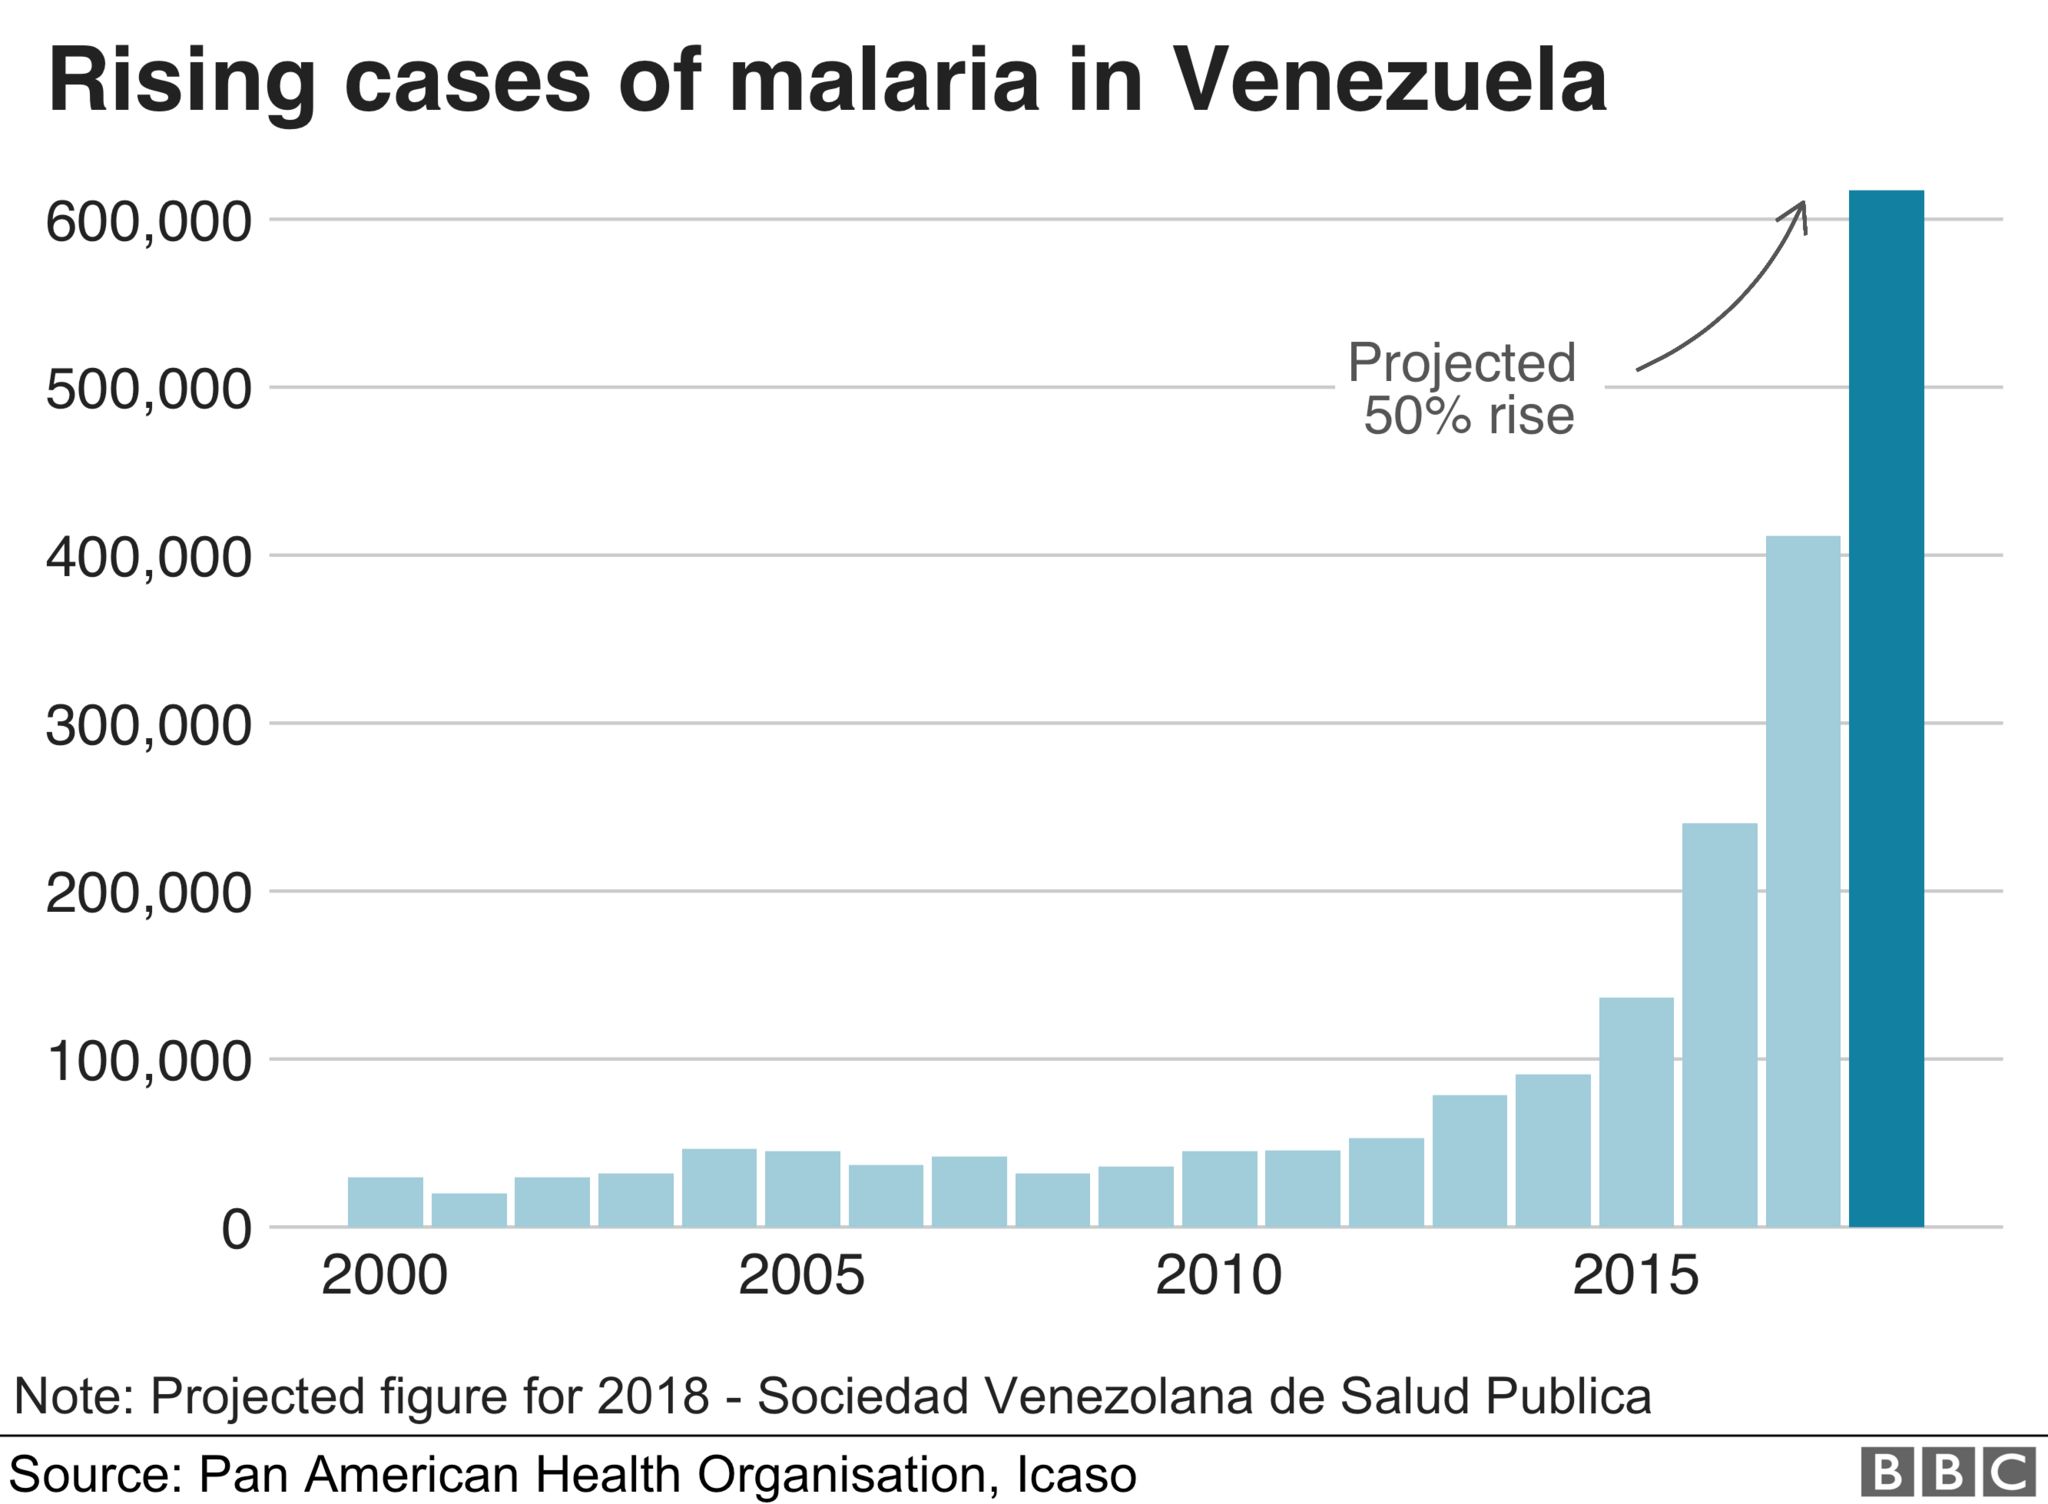 Chart showing the rising number of cases of malaria